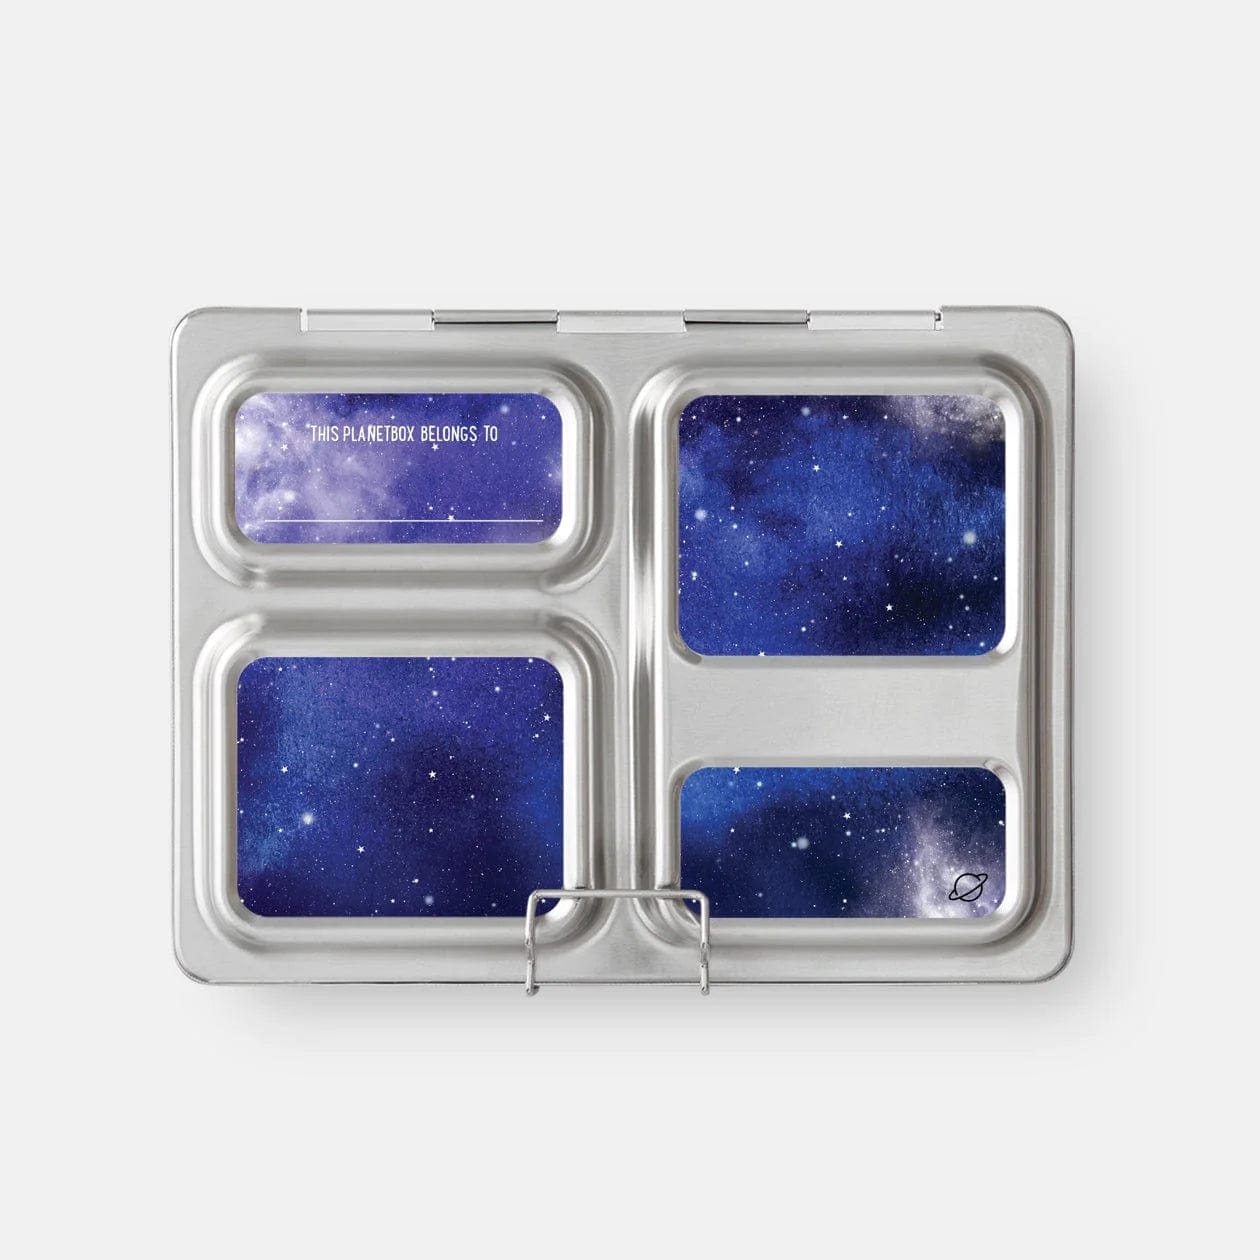 Planetbox LAUNCH Lunch Box Kits (Box, Carry Bag, Containers, Magnets) Unicorn Magic / Stardust